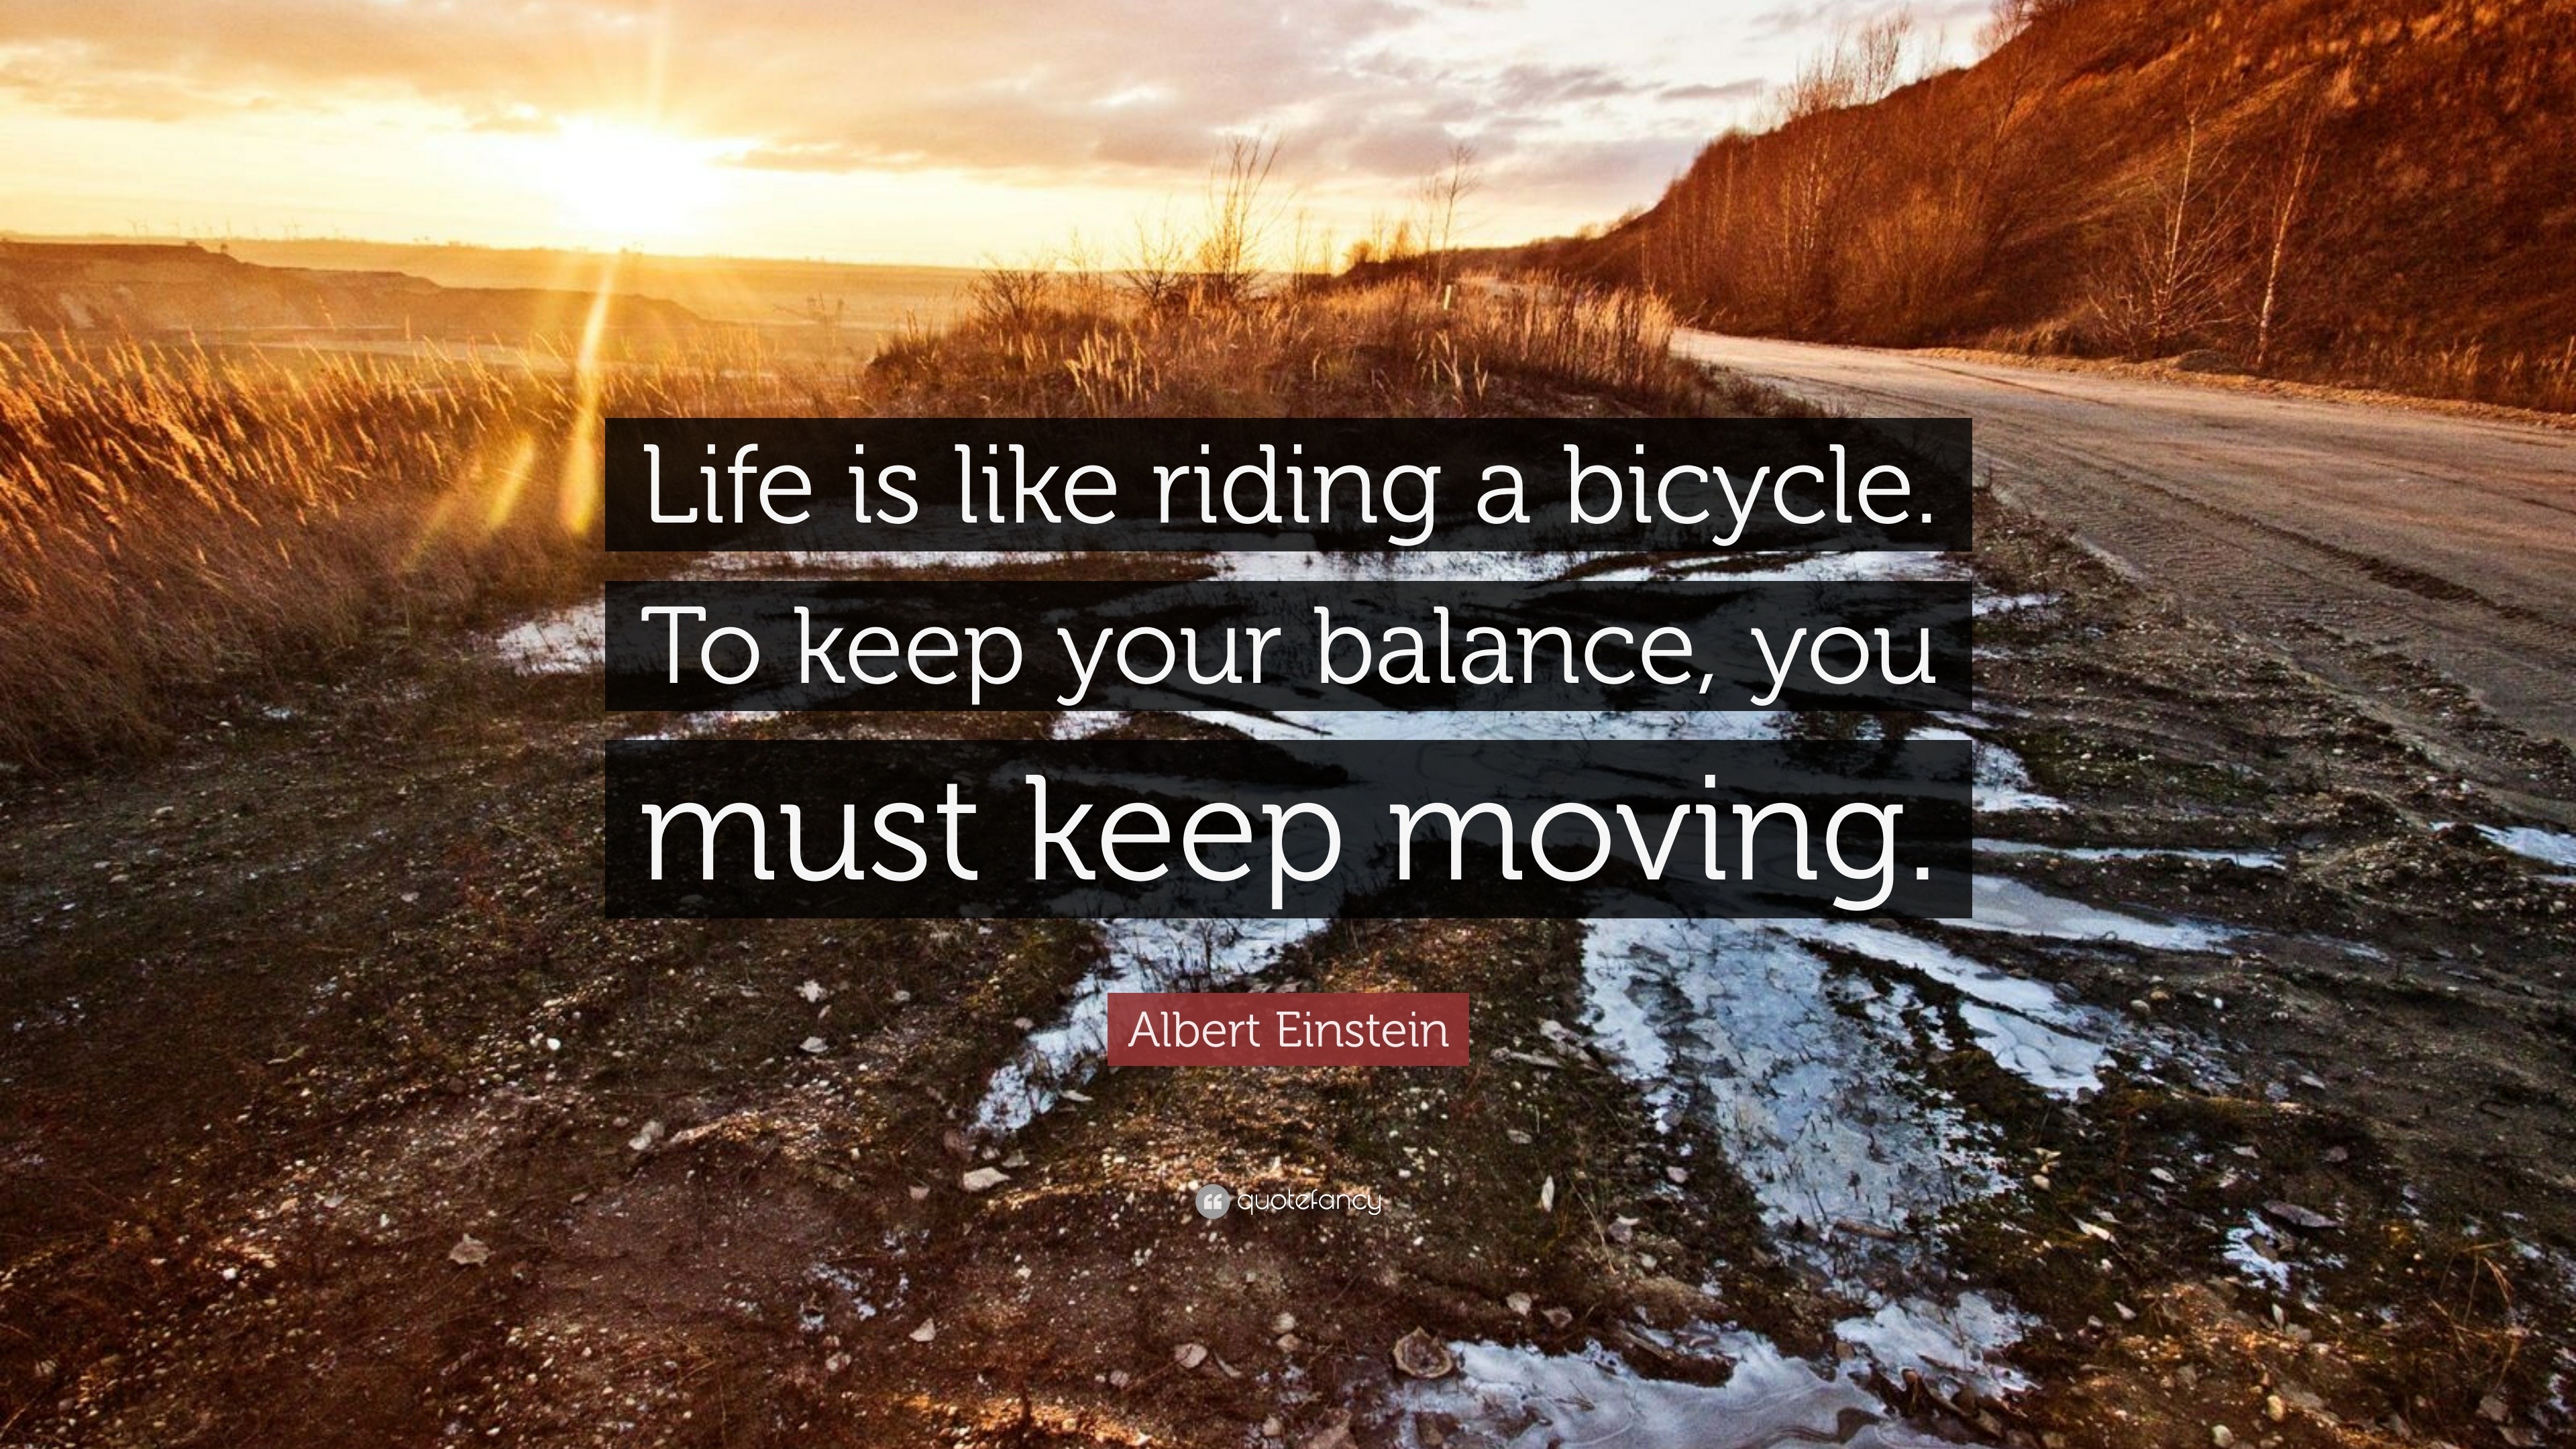 Albert Einstein Quote Life Is Like Riding A Bicycle To Keep Your Balance You Must Keep Moving